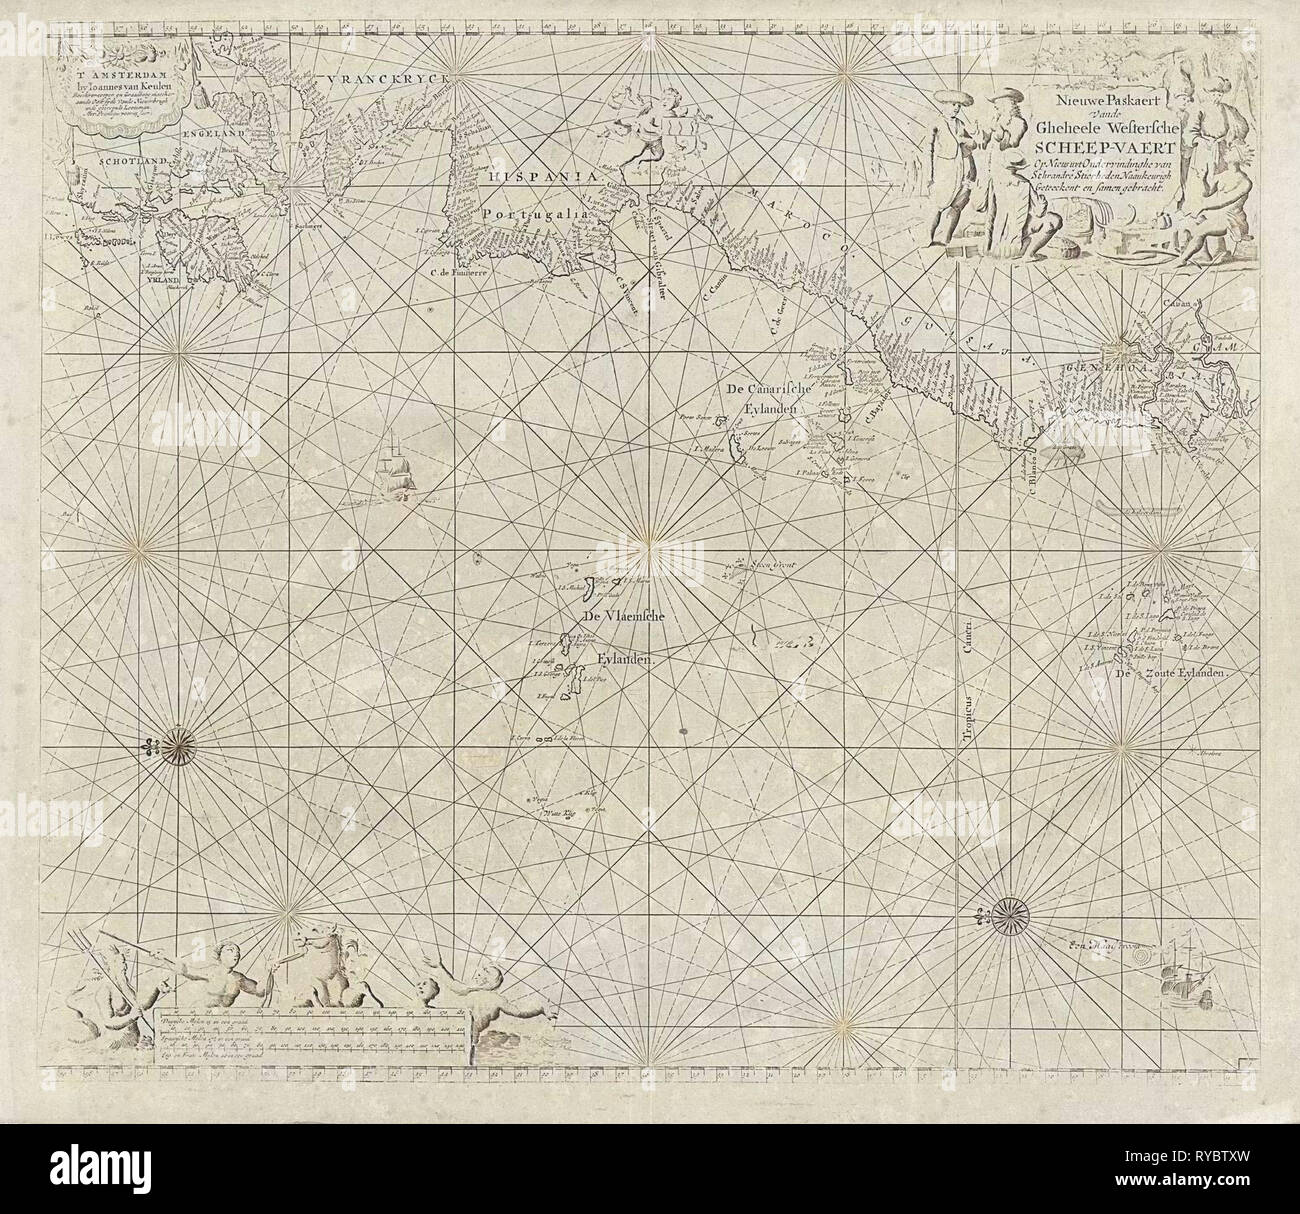 Sea chart of the Atlantic Ocean to the west coast of Europe and parts of Africa, Jan Luyken, Johannes van Keulen I, unknown, 1681-1803 Stock Photo